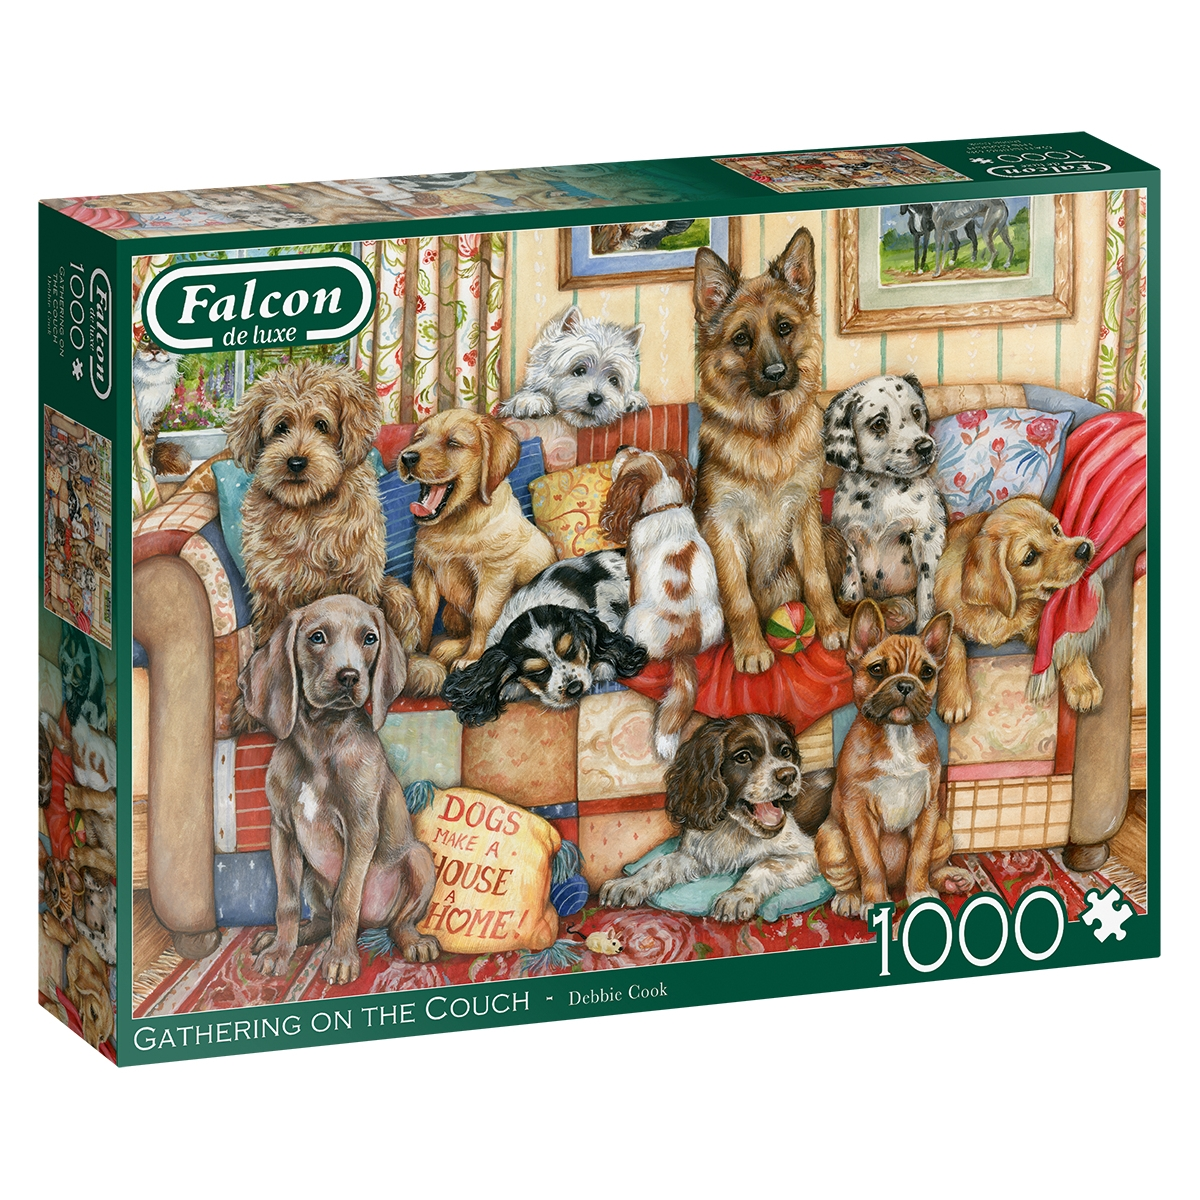 Jumbo on Dog Mehrfarben The FALCON Gathering Puzzle 11293 Zubehör, Couch-1000 Teile